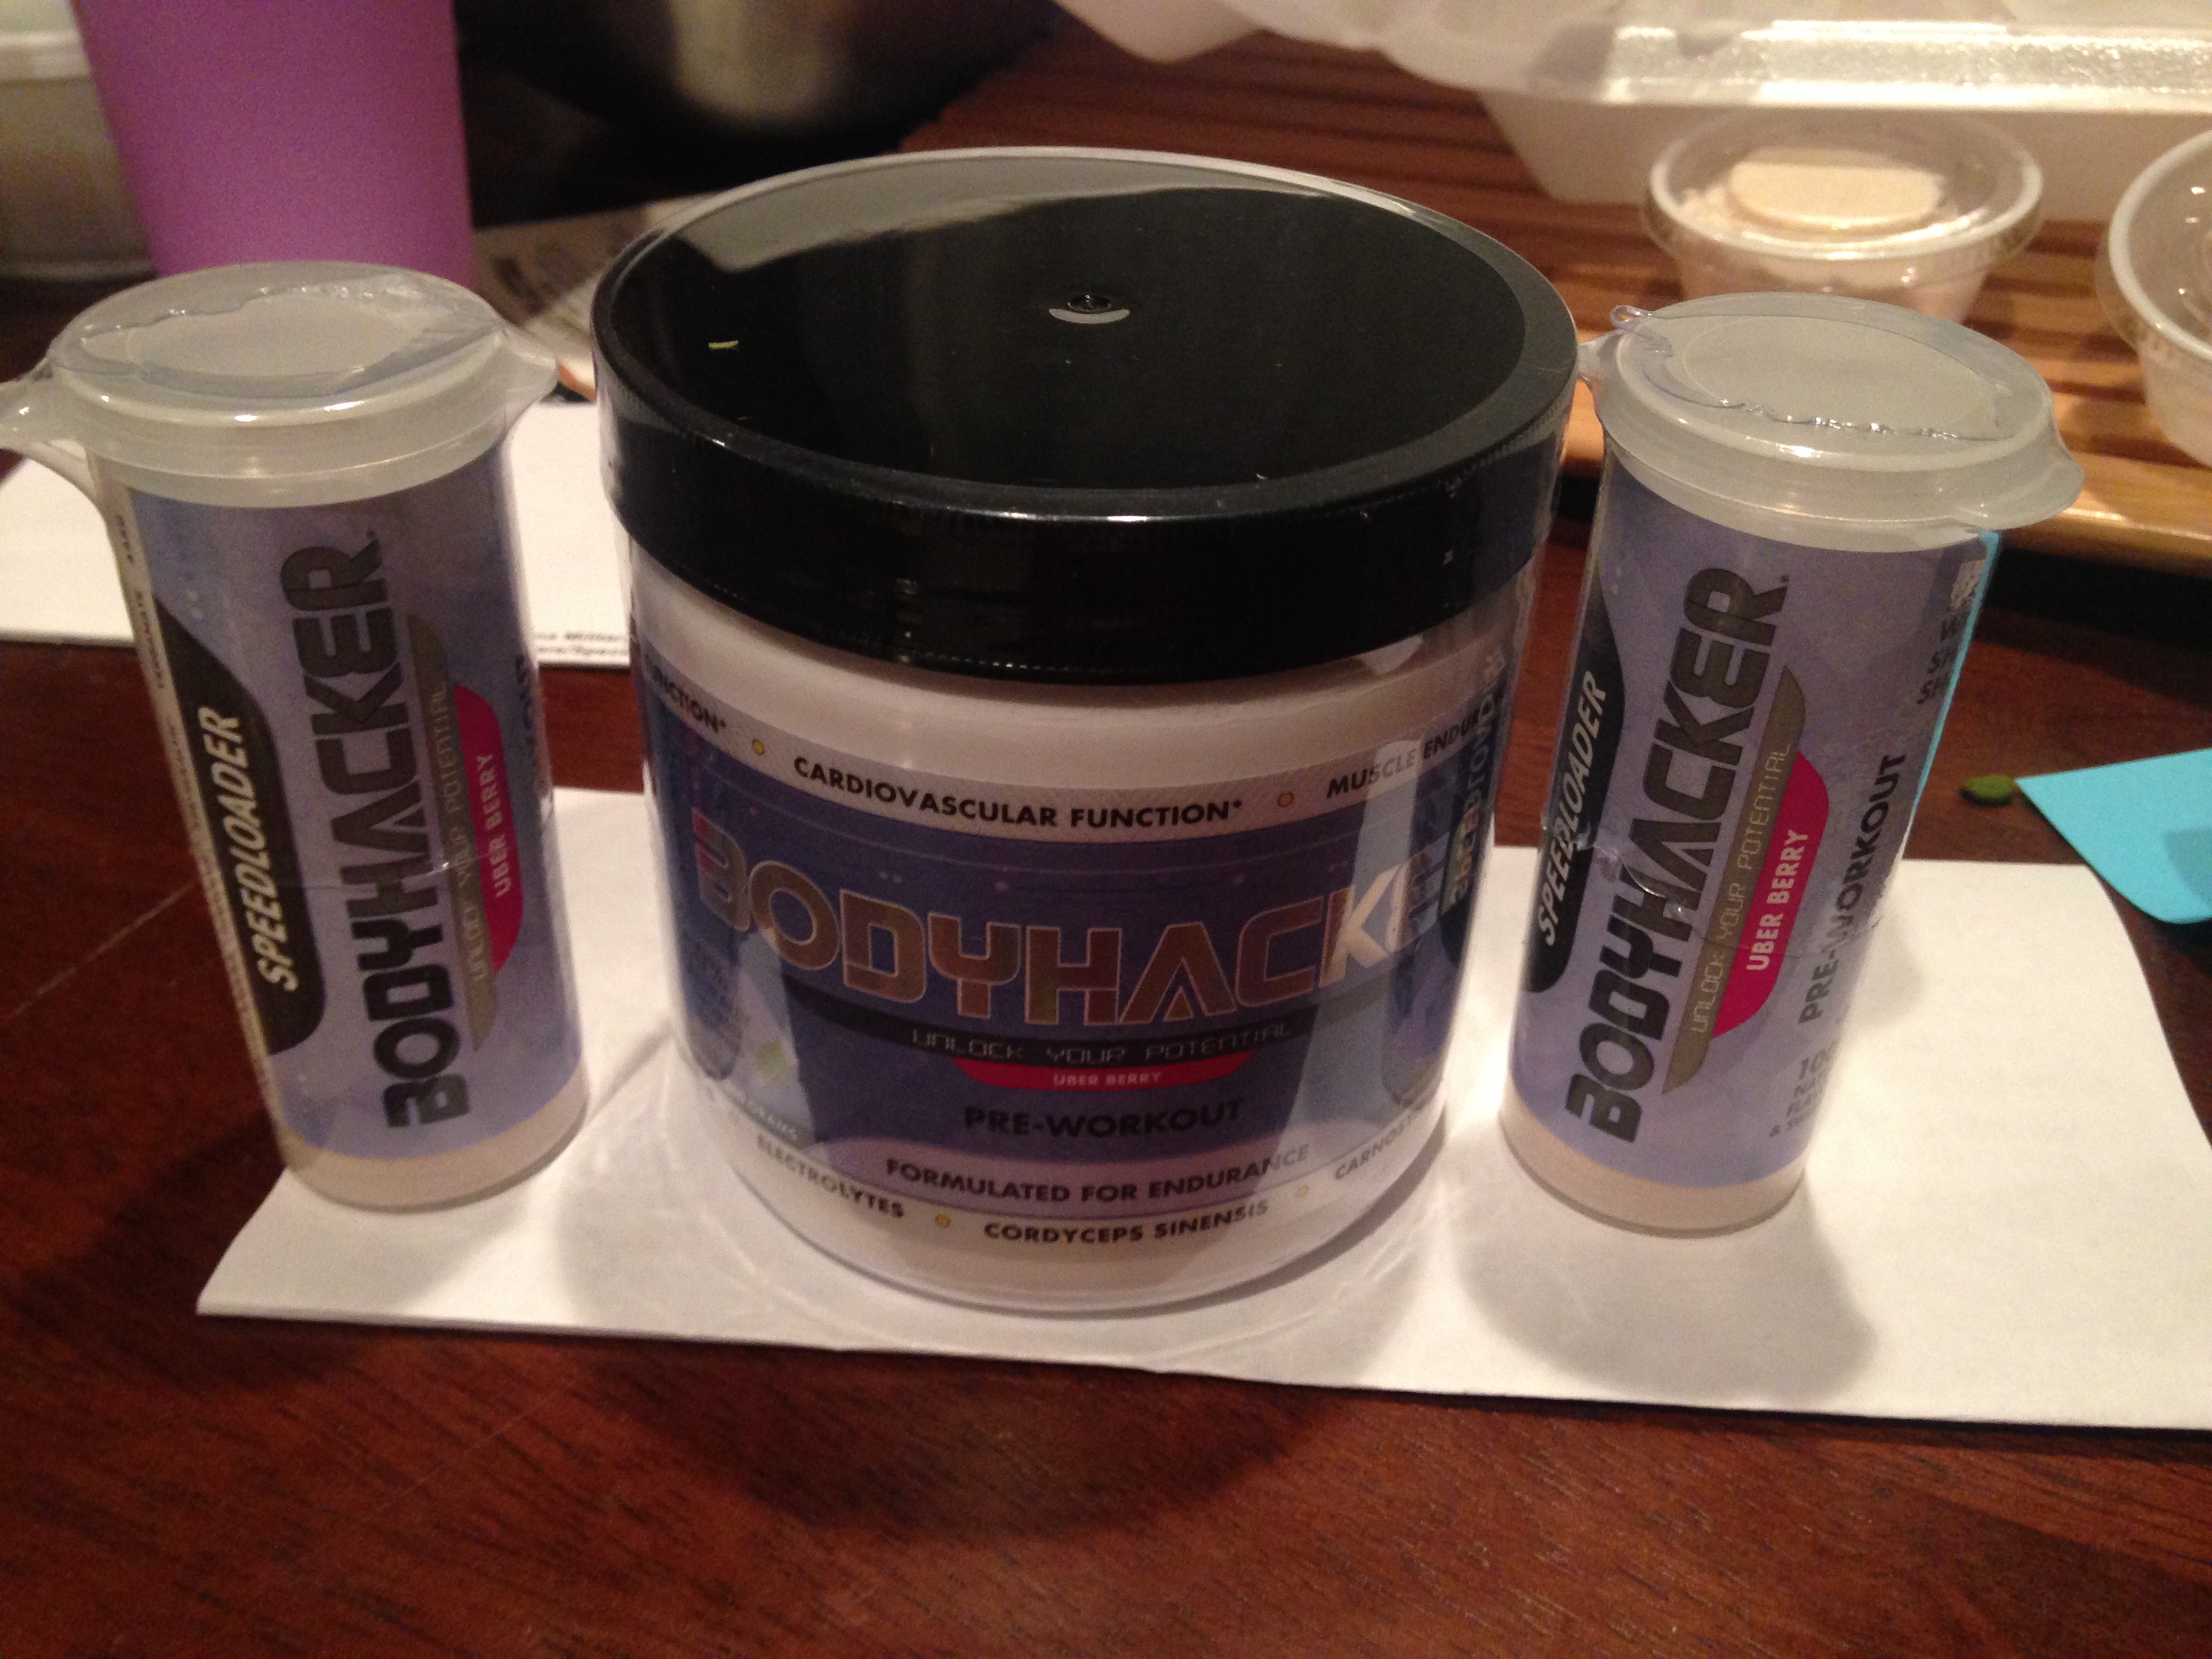 Supplement Review: Bodyhacker  Mud Run, OCR, Obstacle Course Race